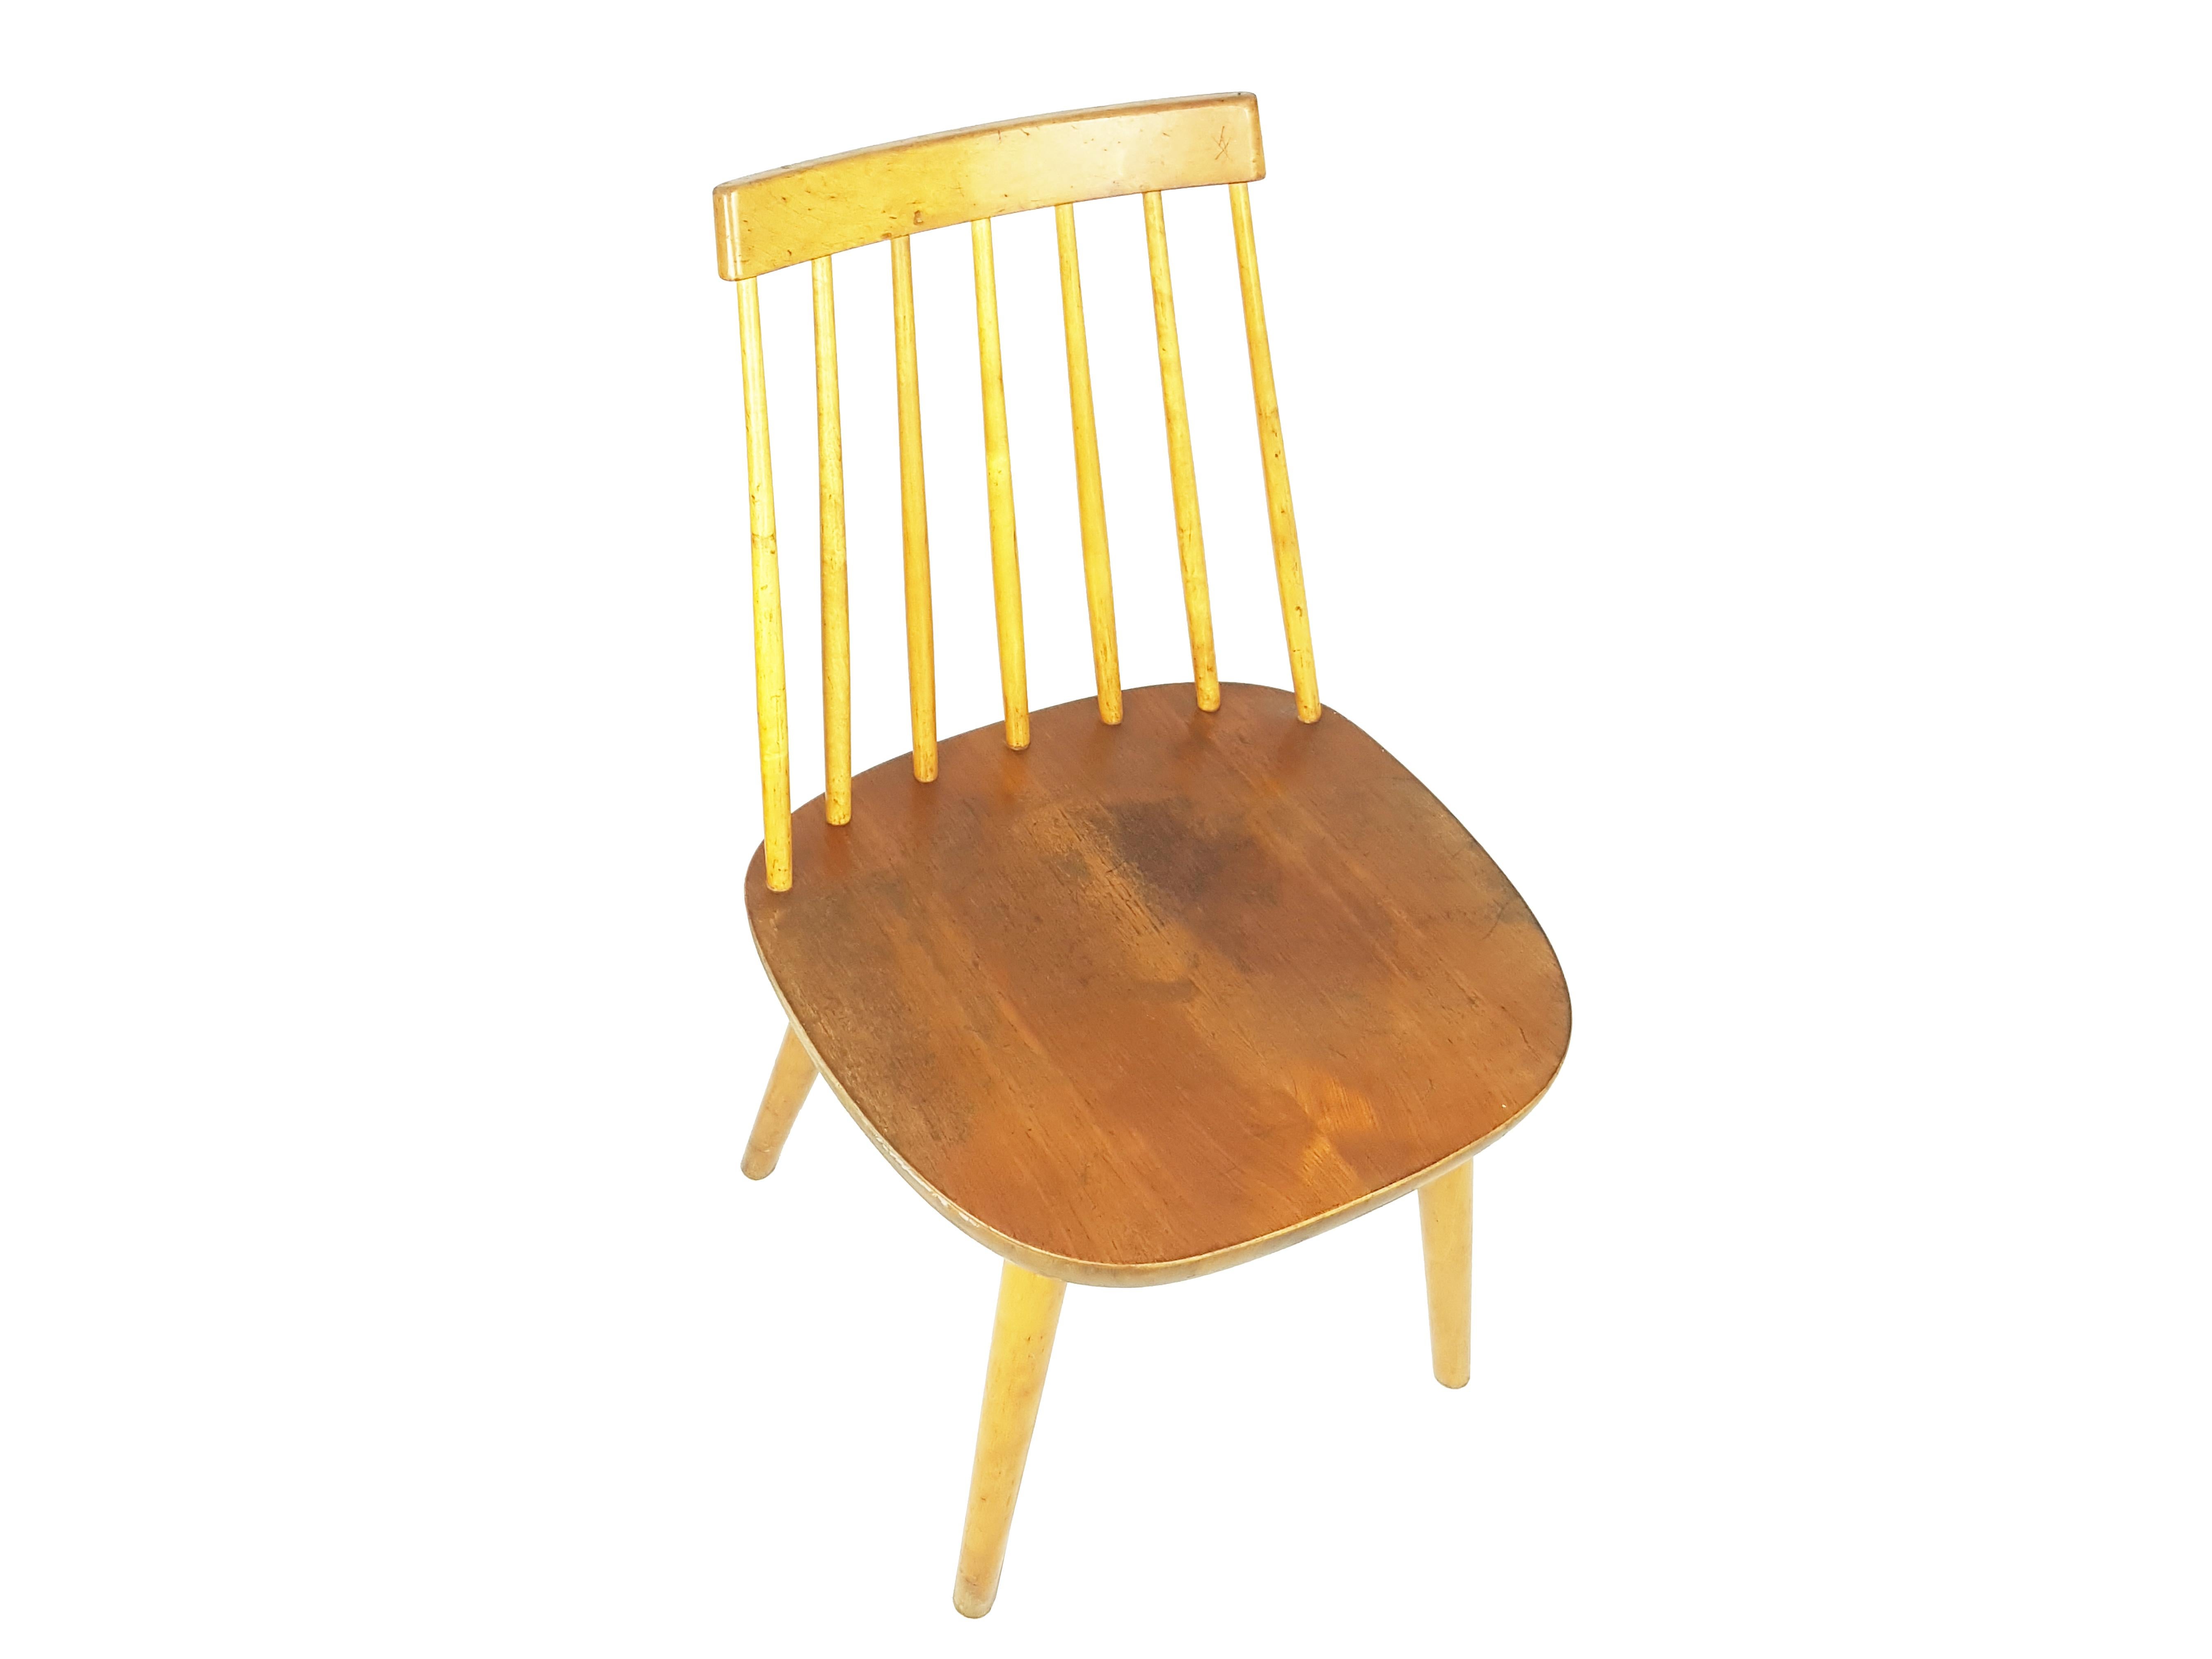 Wooden chair produced in Sveden around 1950-60s. Good vintage condition: visible signs of wear due to time and use.